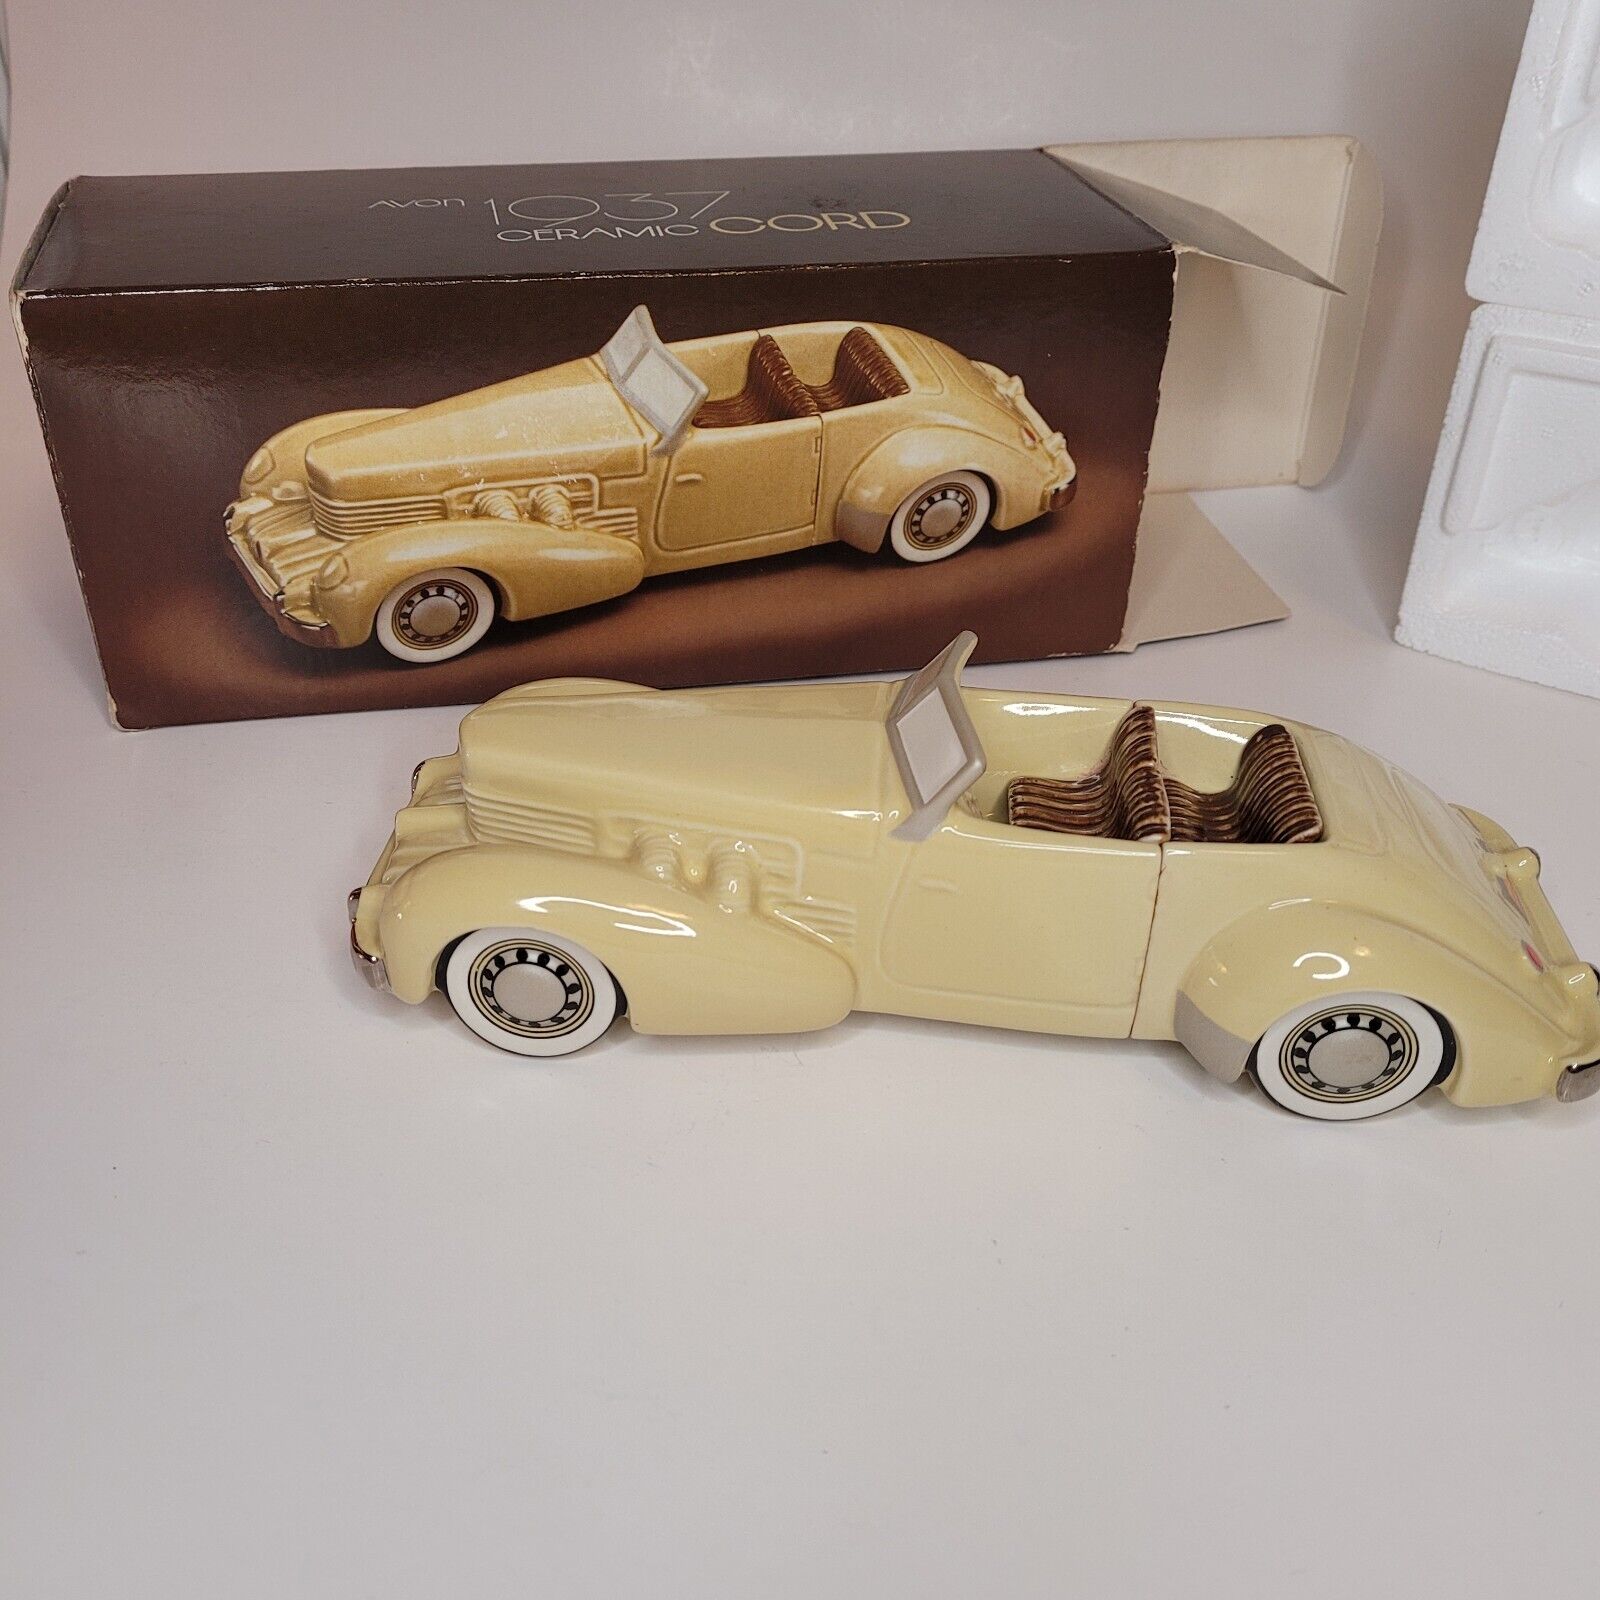 Vintage Avon Collectable Car, Cord 1937 Avon Classic Car Ceramic Handcrafted 